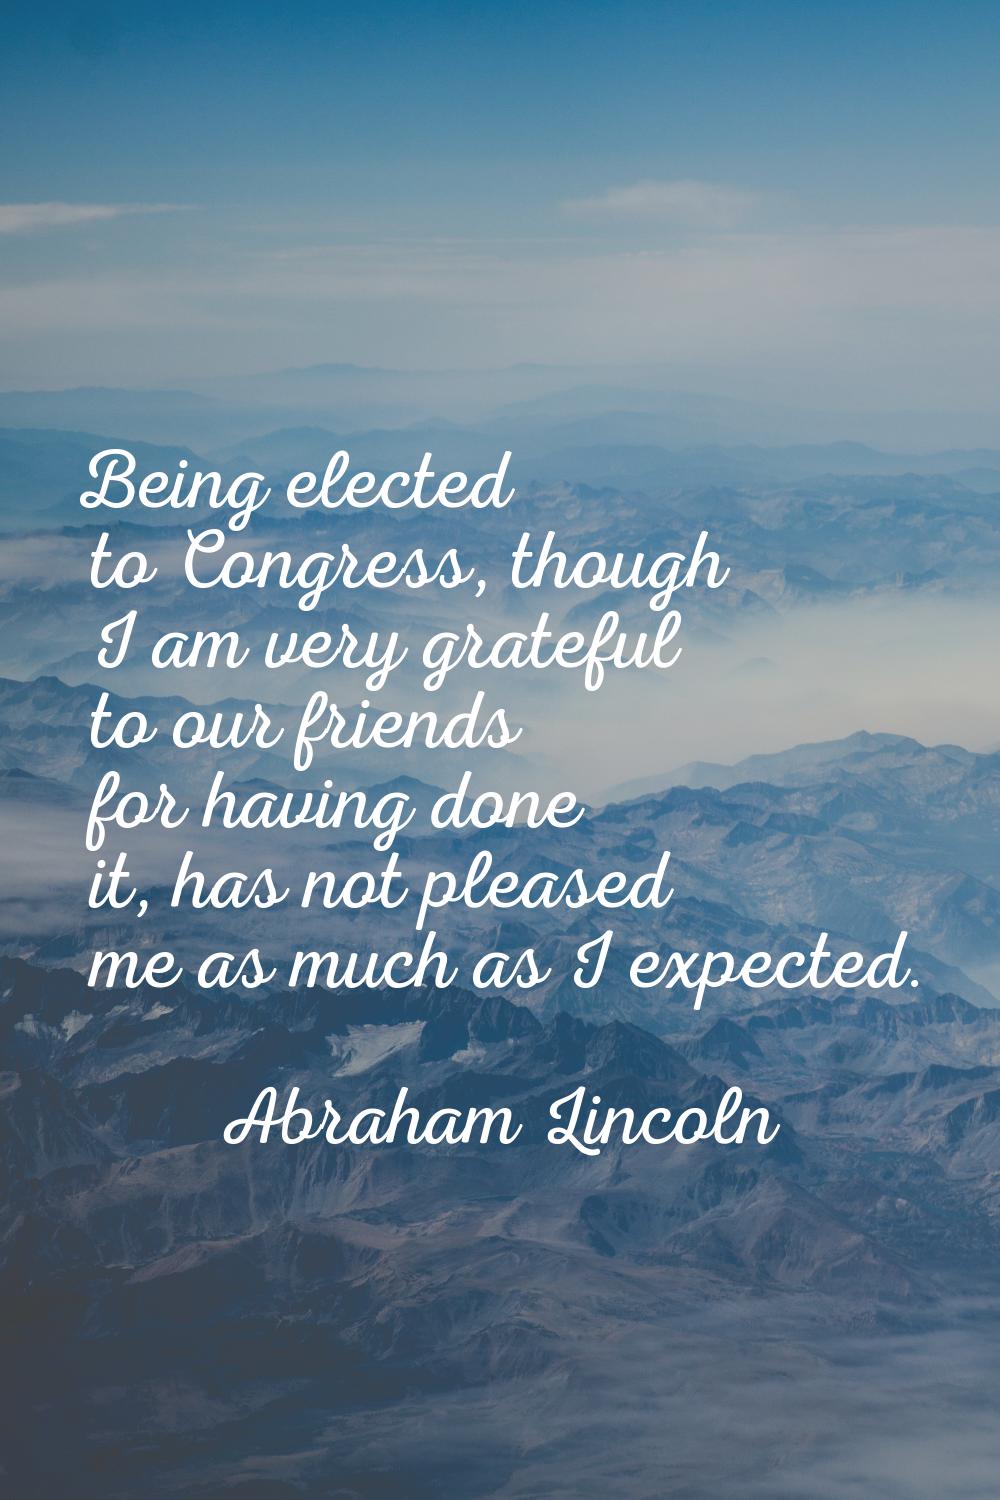 Being elected to Congress, though I am very grateful to our friends for having done it, has not ple